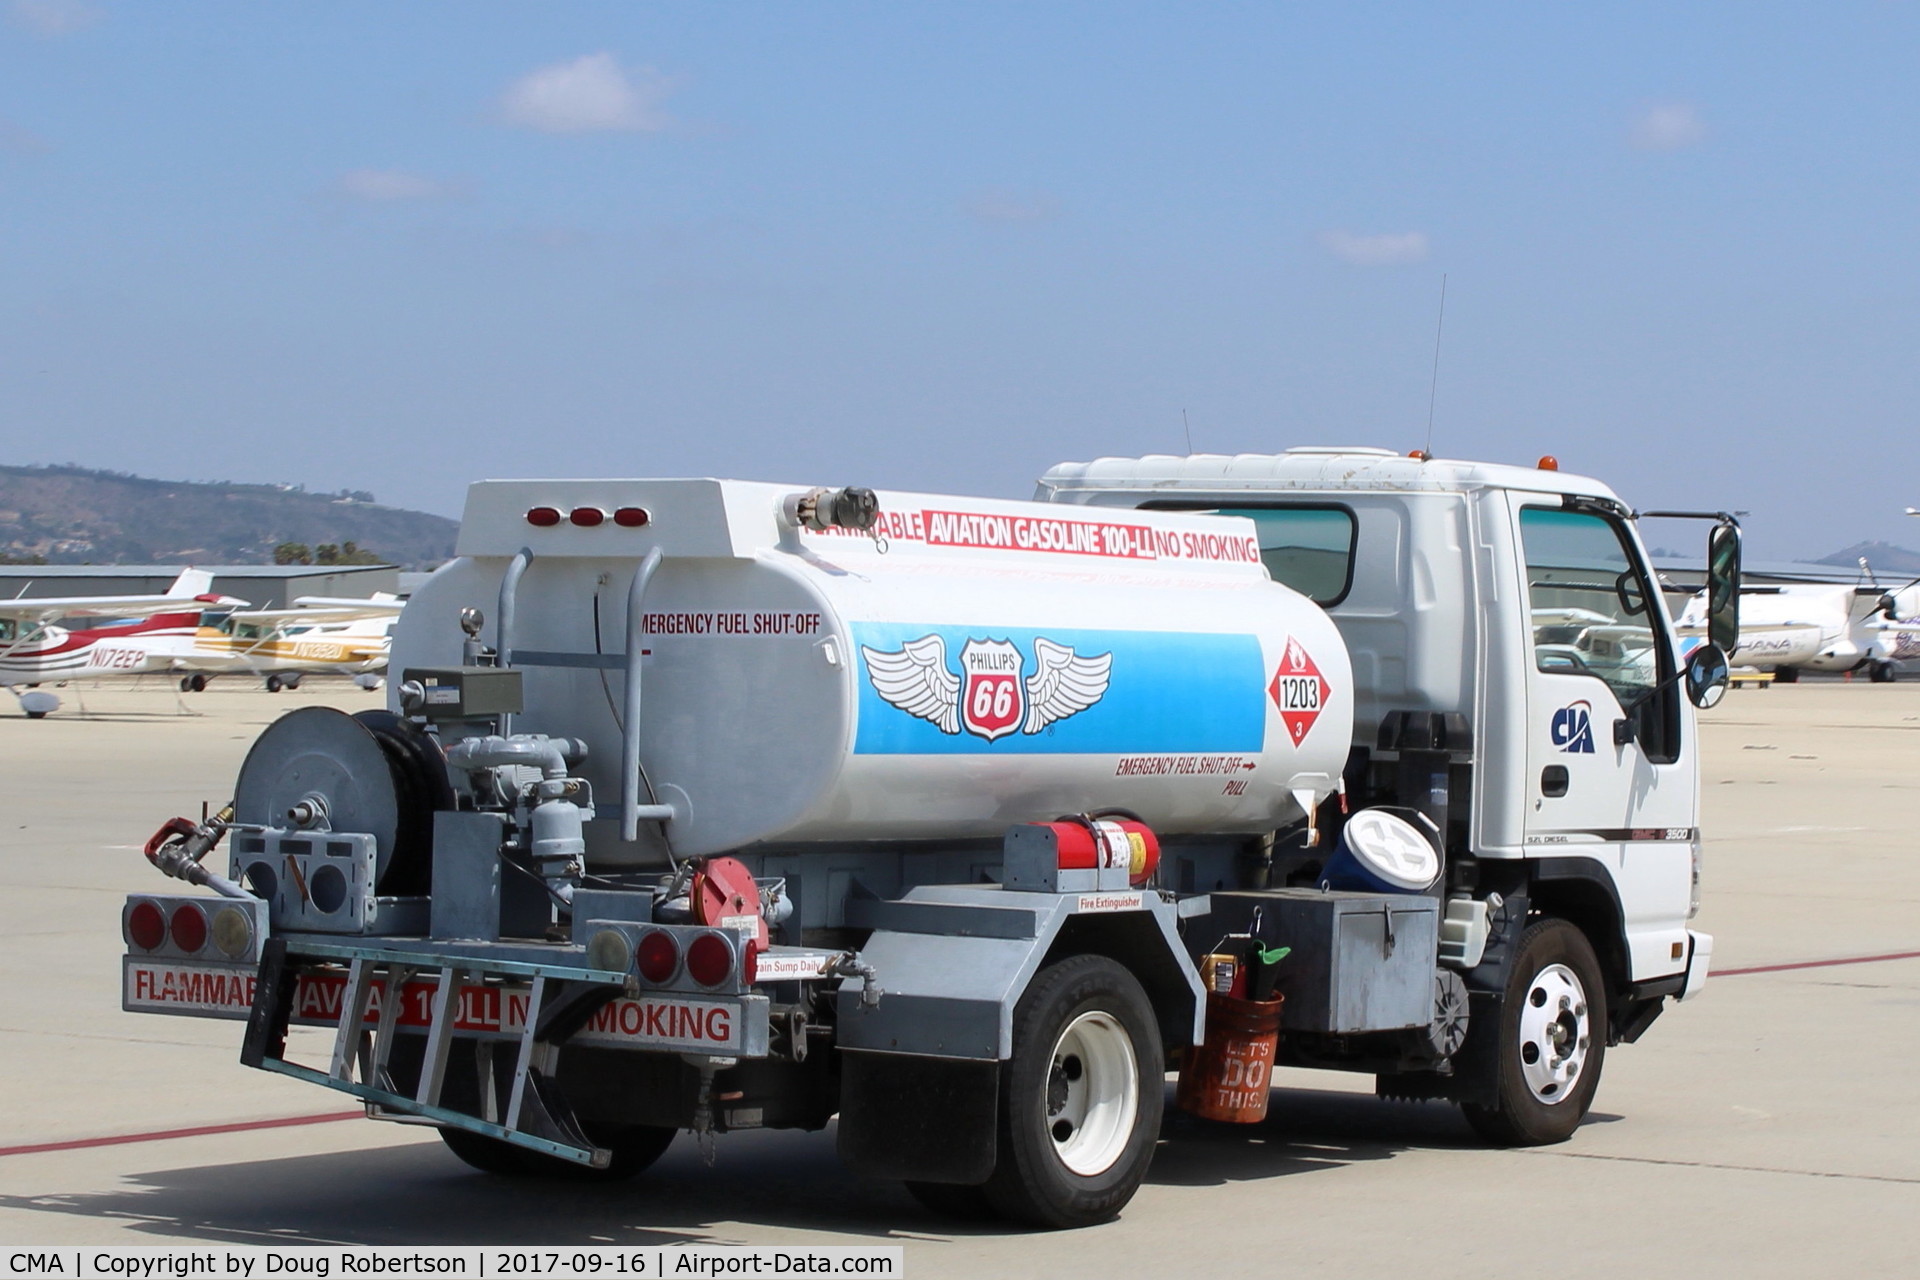 Camarillo Airport (CMA) - Channel Islands Aviation 100LL Phillips 66 Fuel Truck, on their ramp. One of several options including Self-Service near the CMA Control Tower.